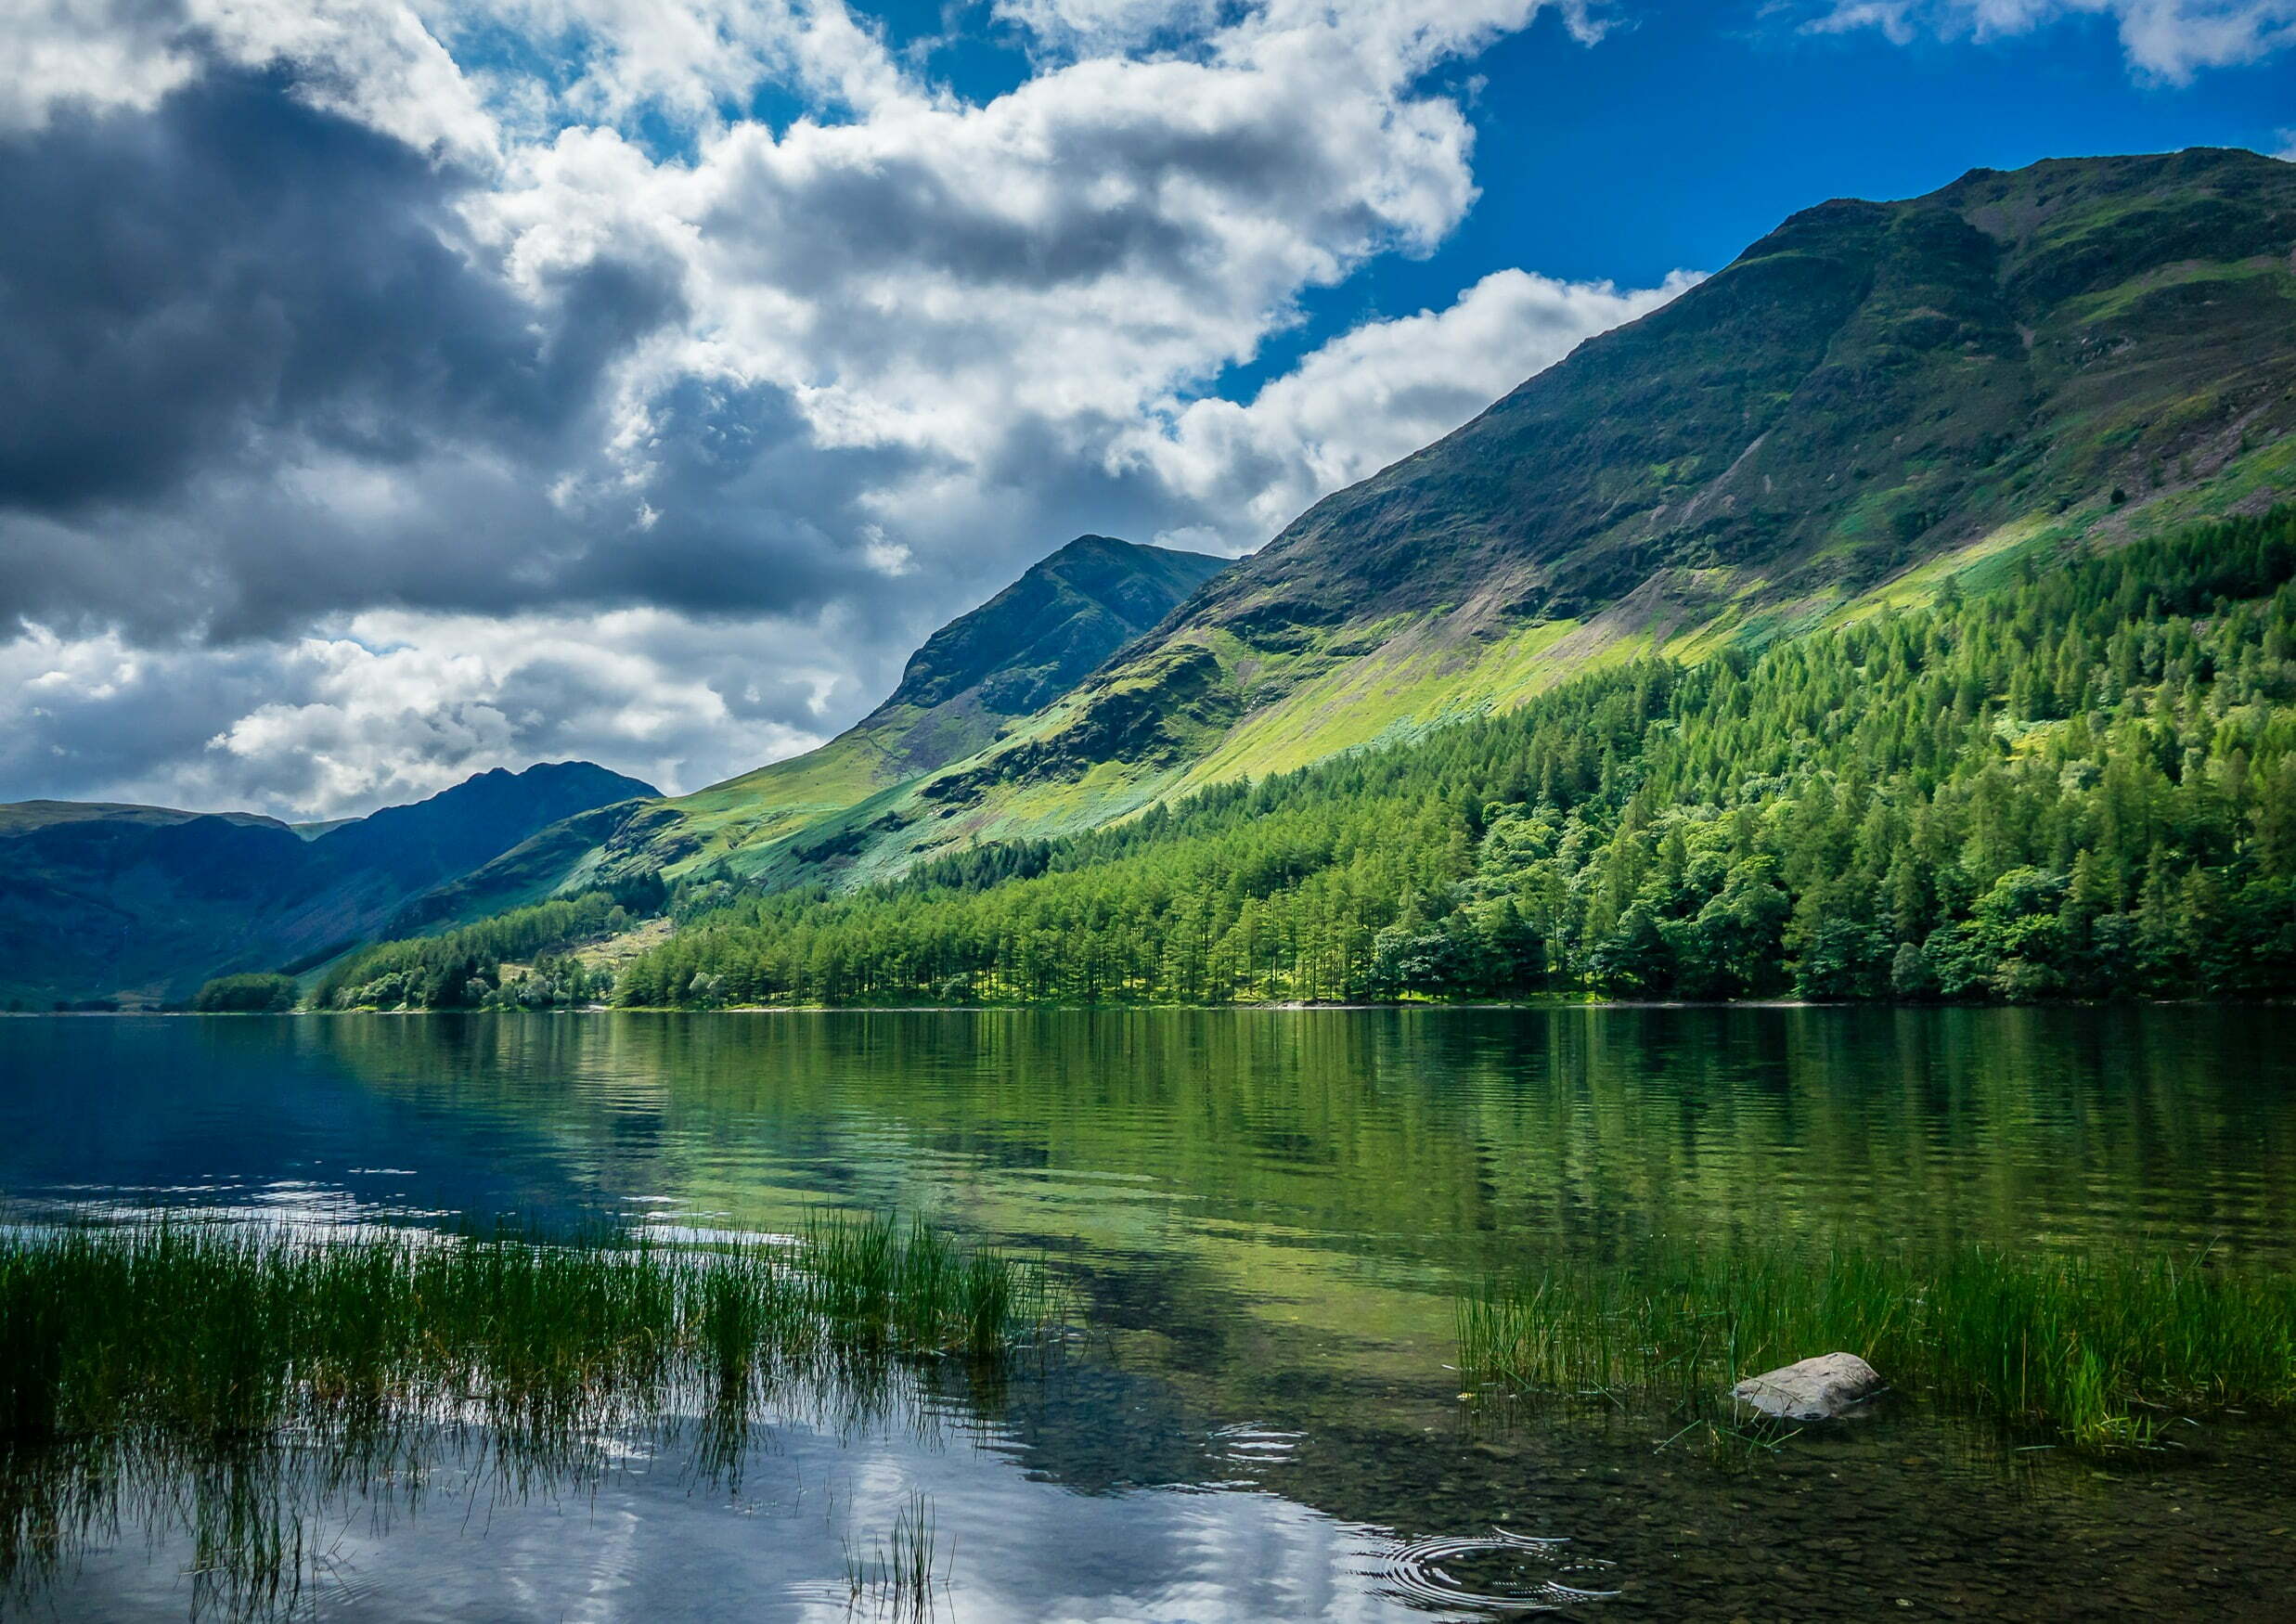 The postcard-photo perfect scenery of lake district